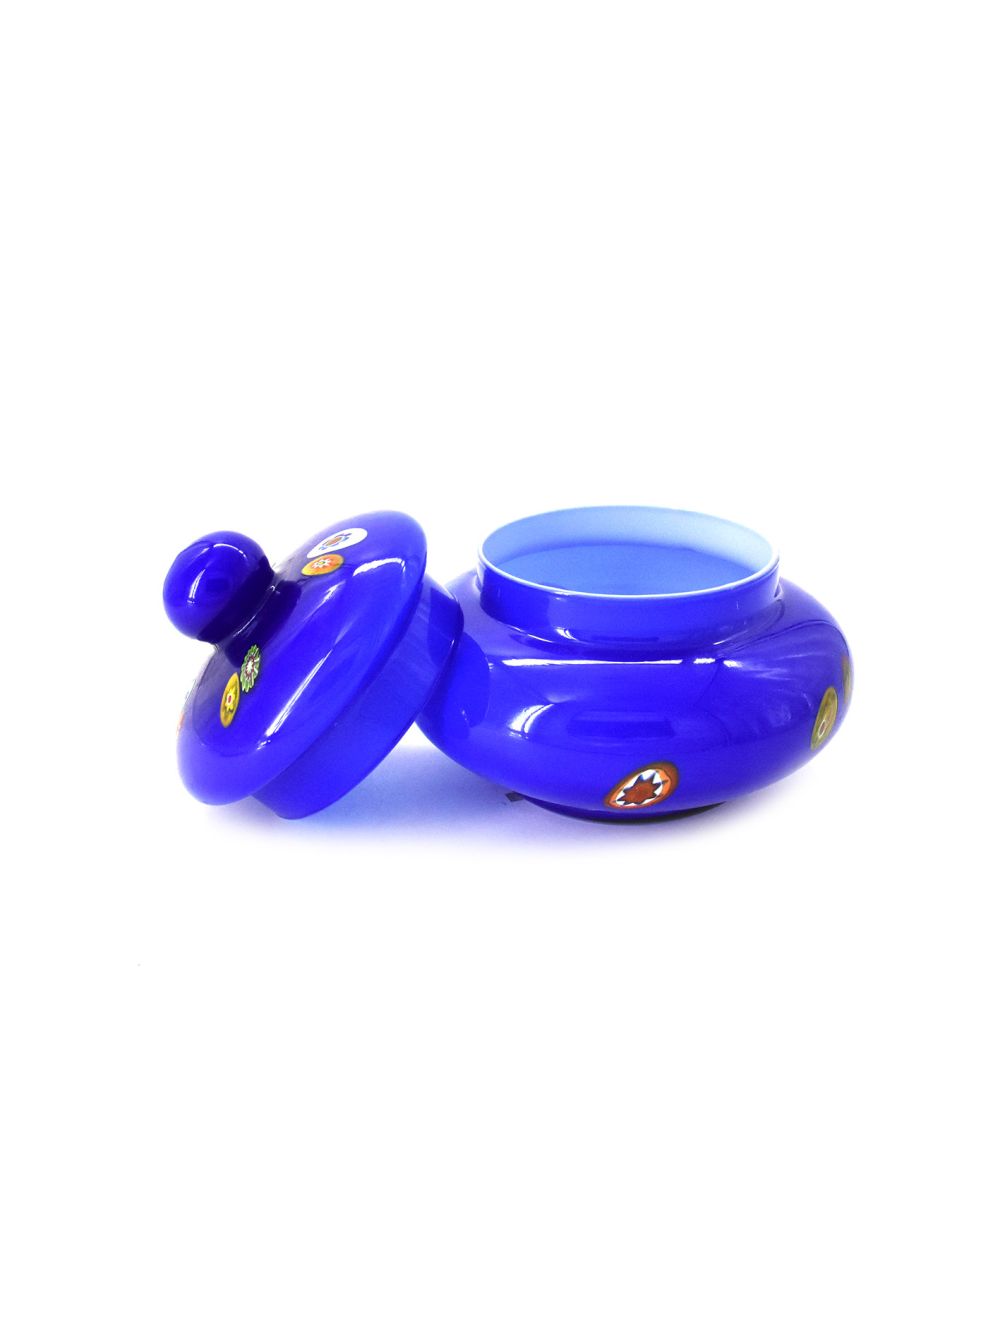 Blue Candy Jar With Cap